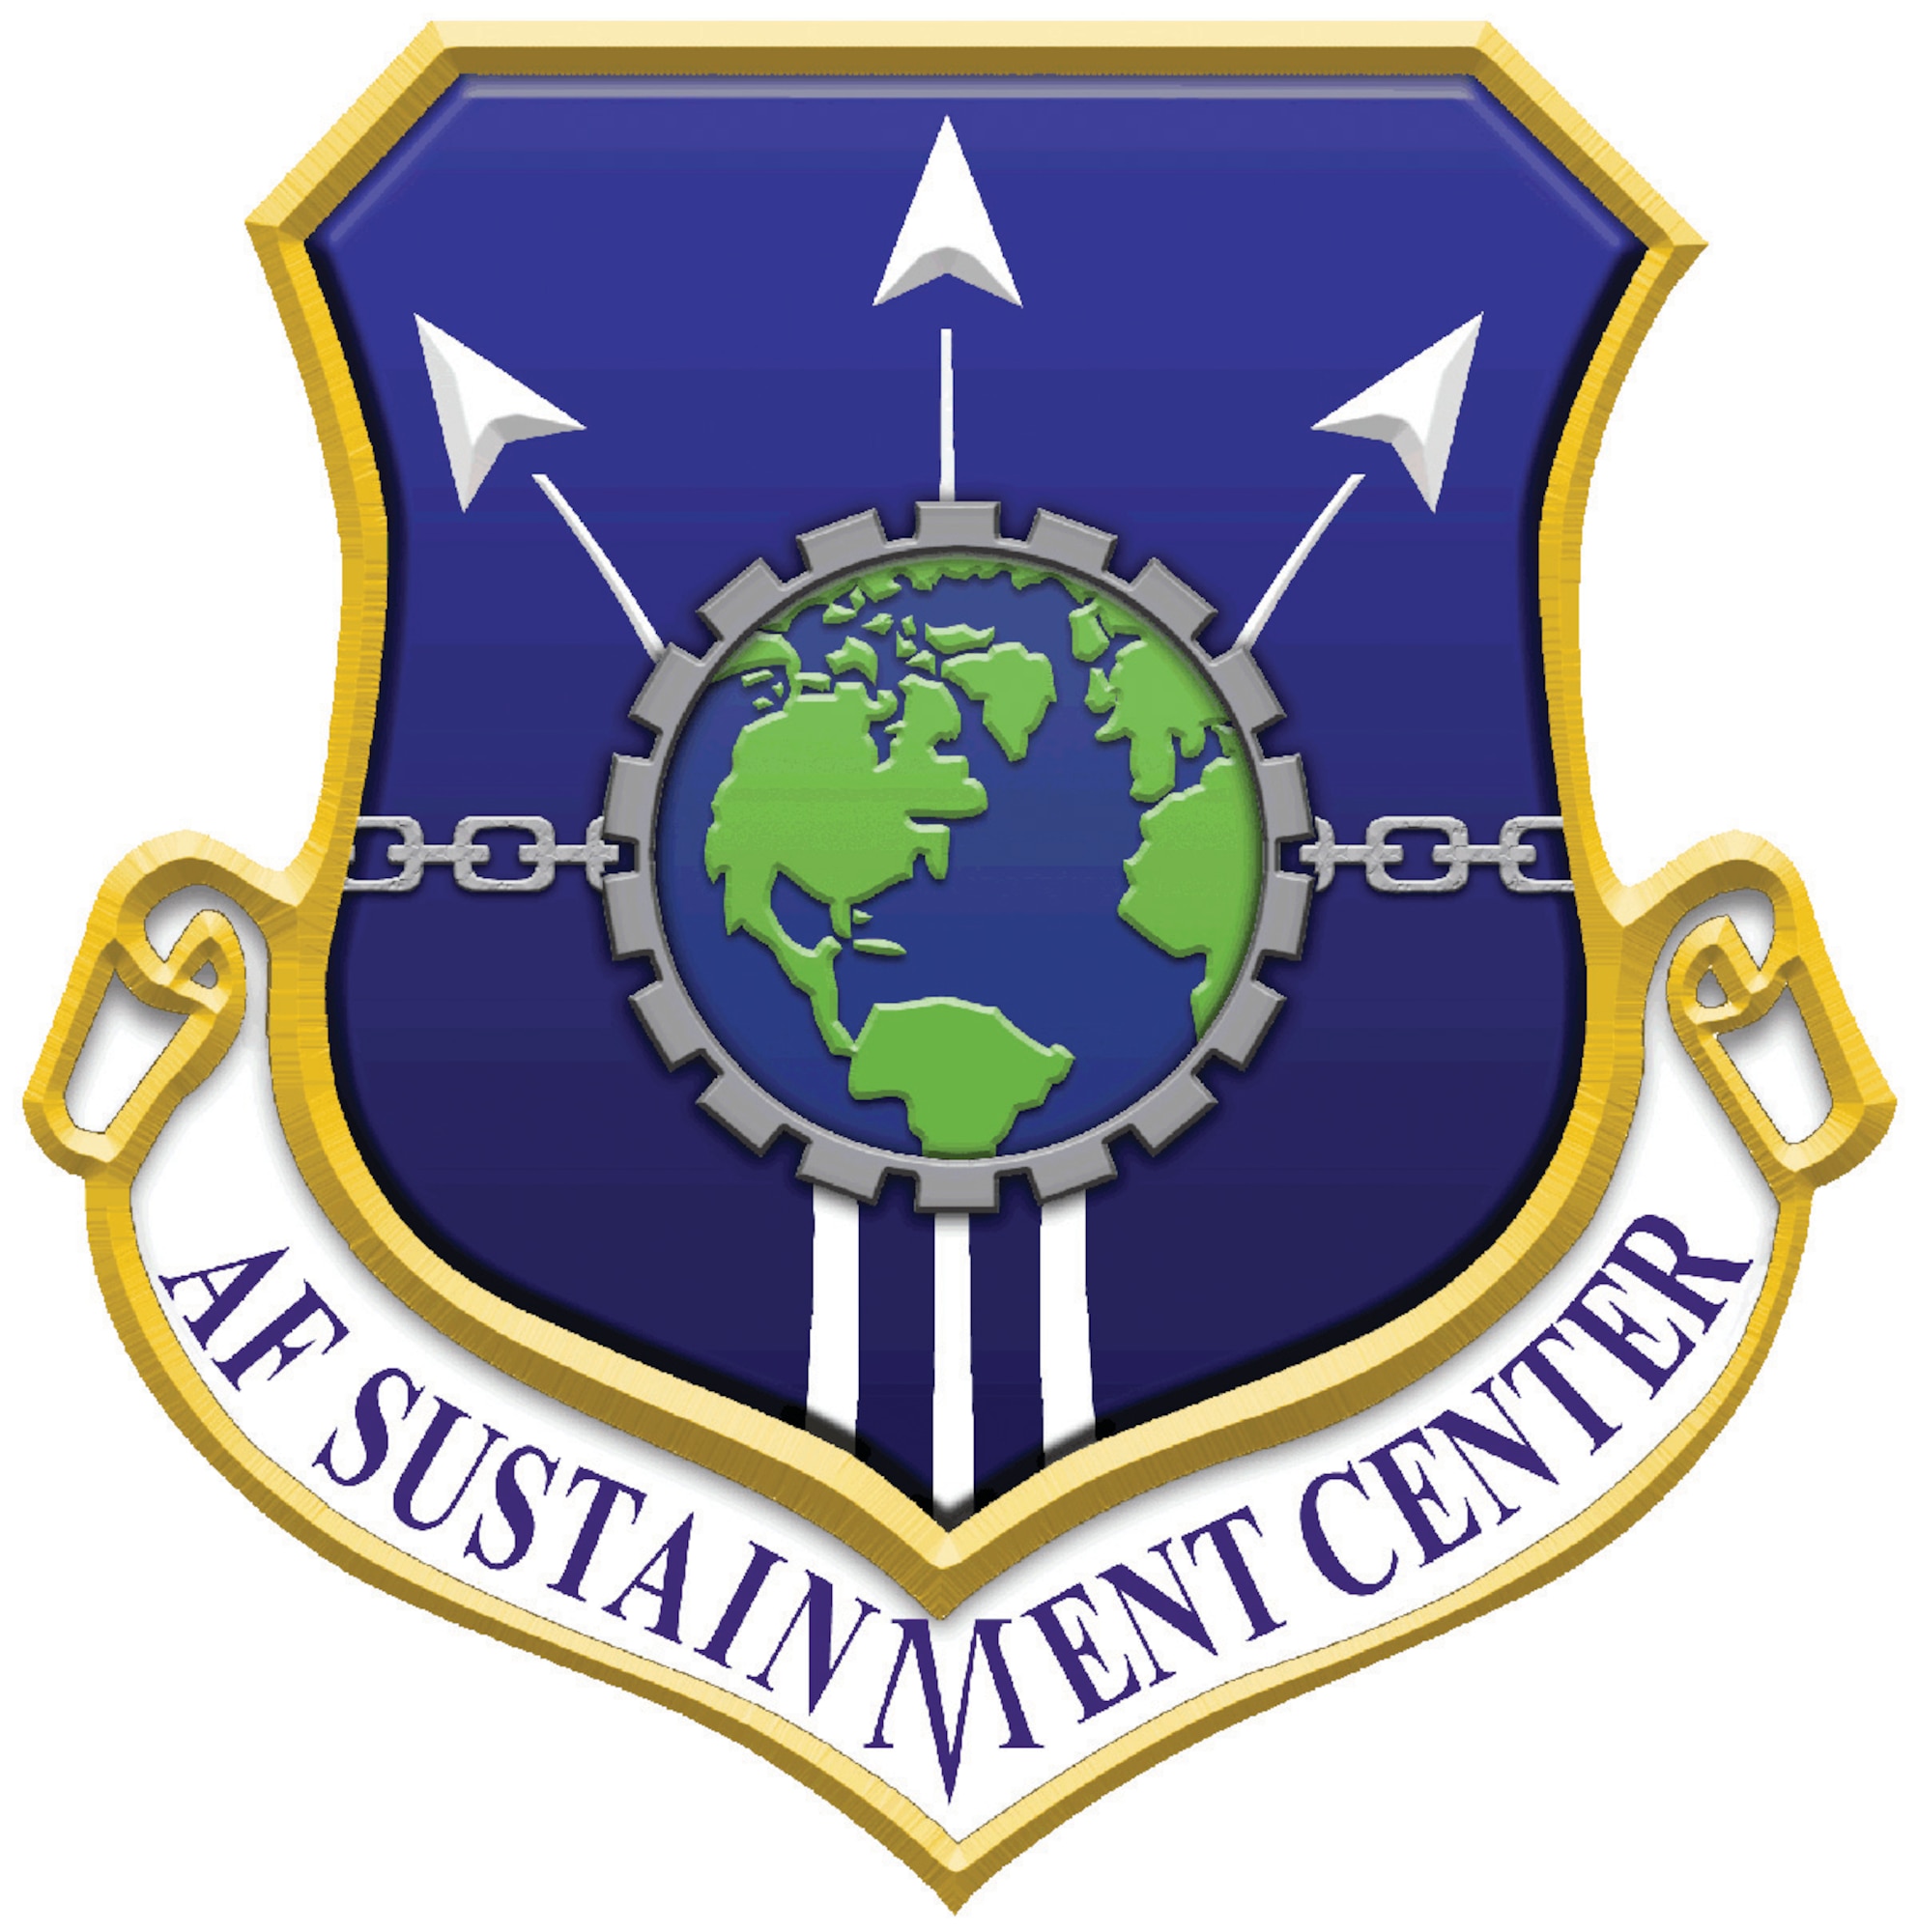 Rotator graphic that was created to display the name and logo of Air Force Sustainment Center. (U.S. Air Force graphic)